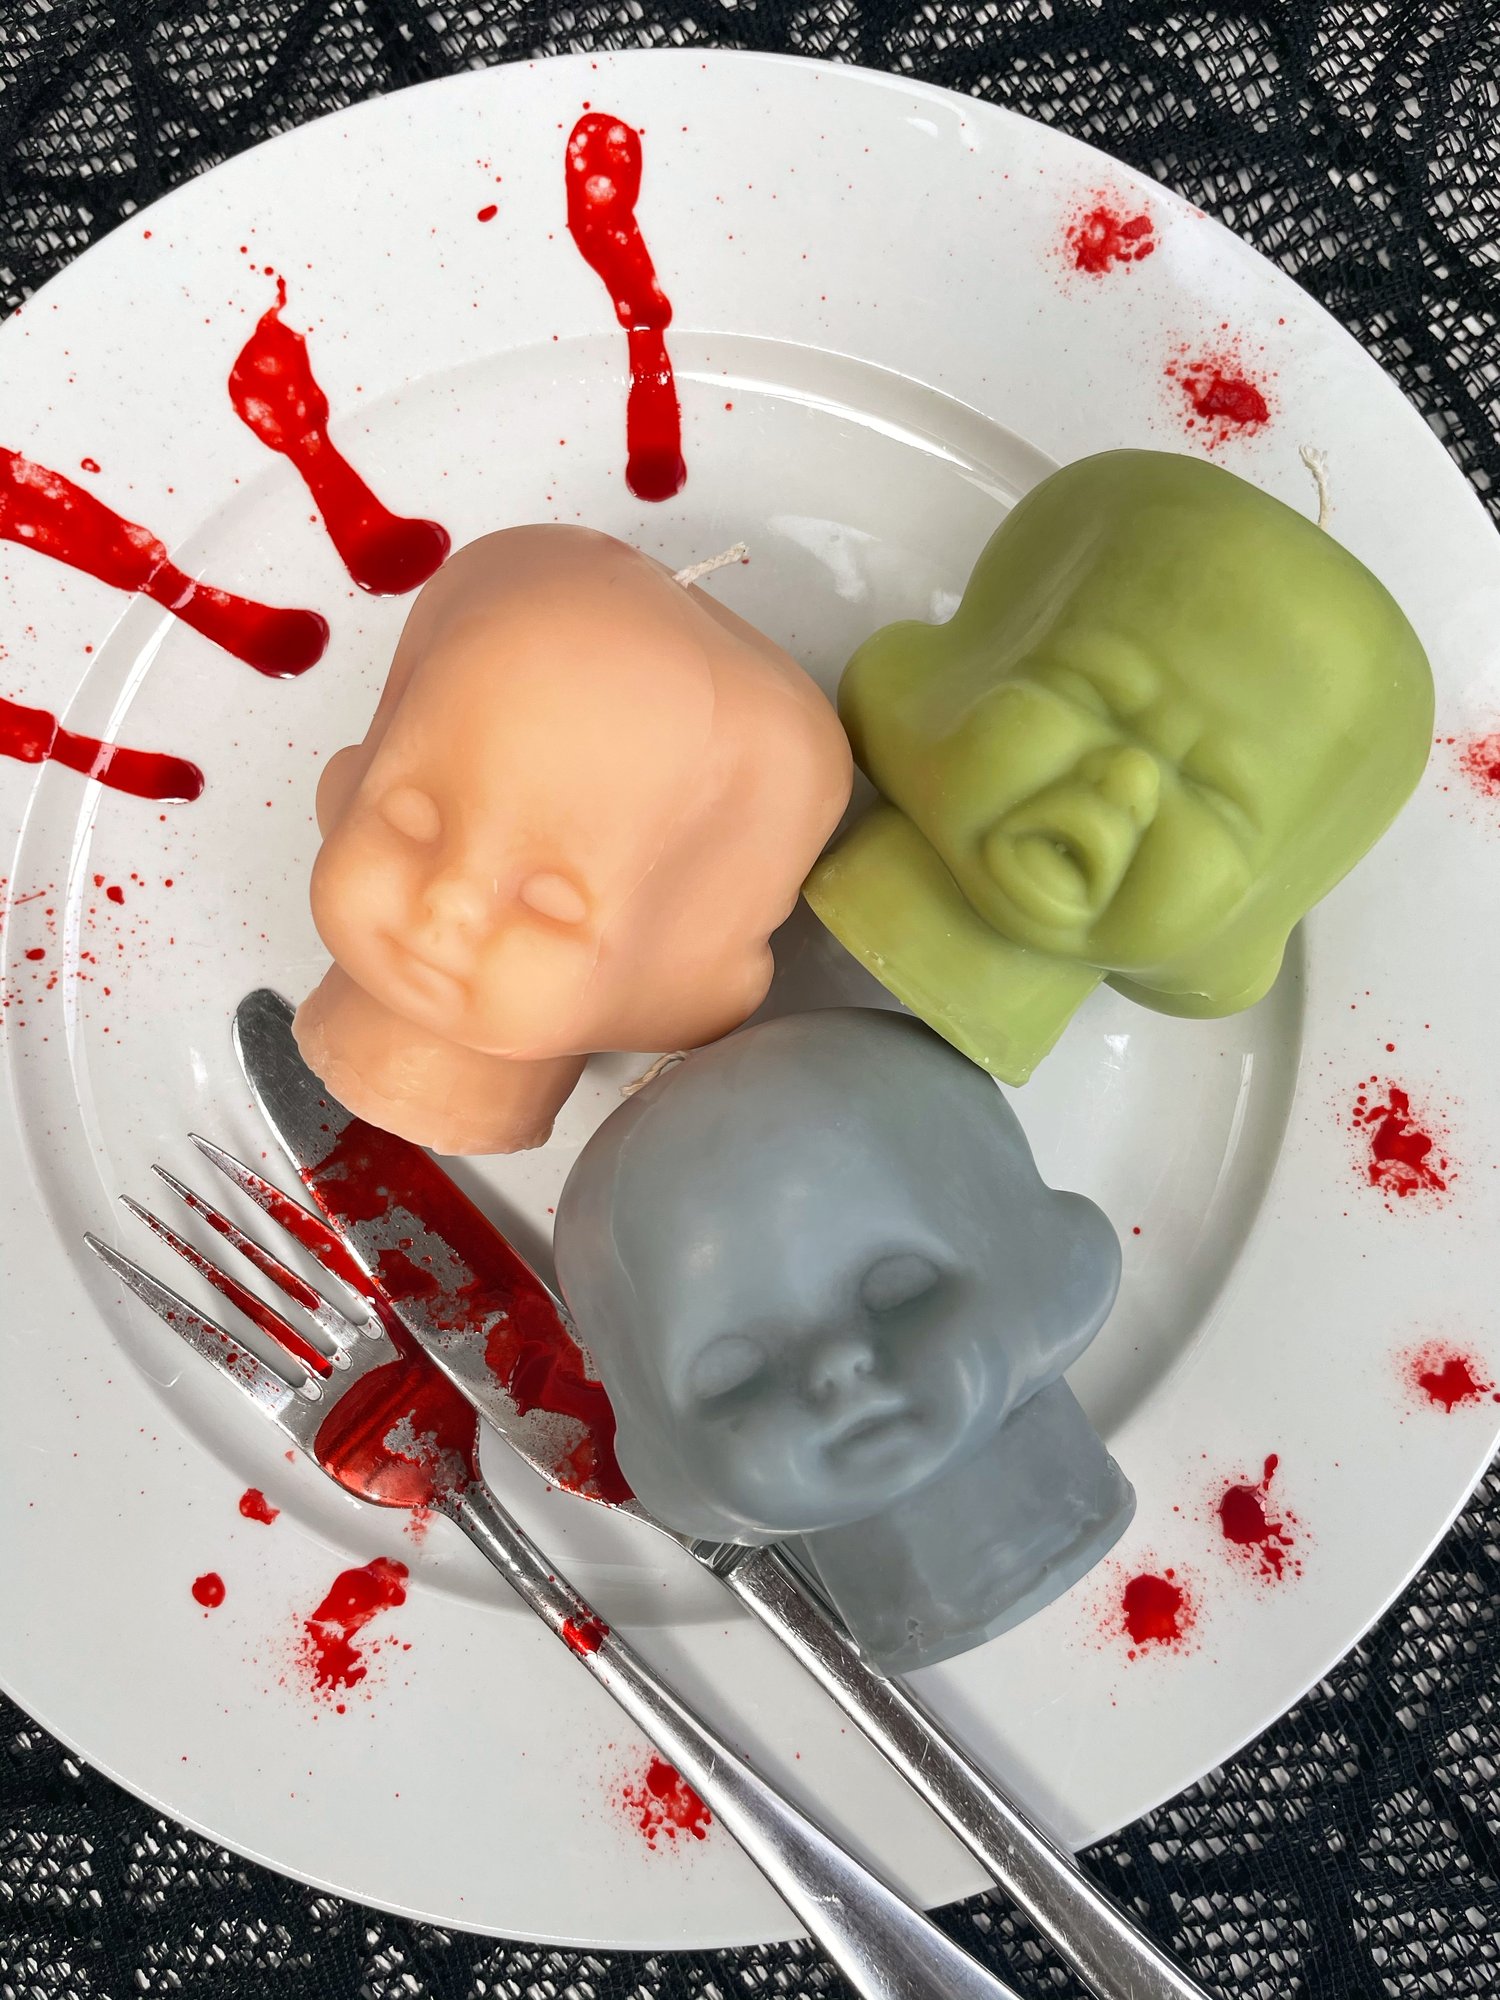 3d Zombie Lolly Wax Melt Silicone Mold for Wax. Wax Melt Silicone